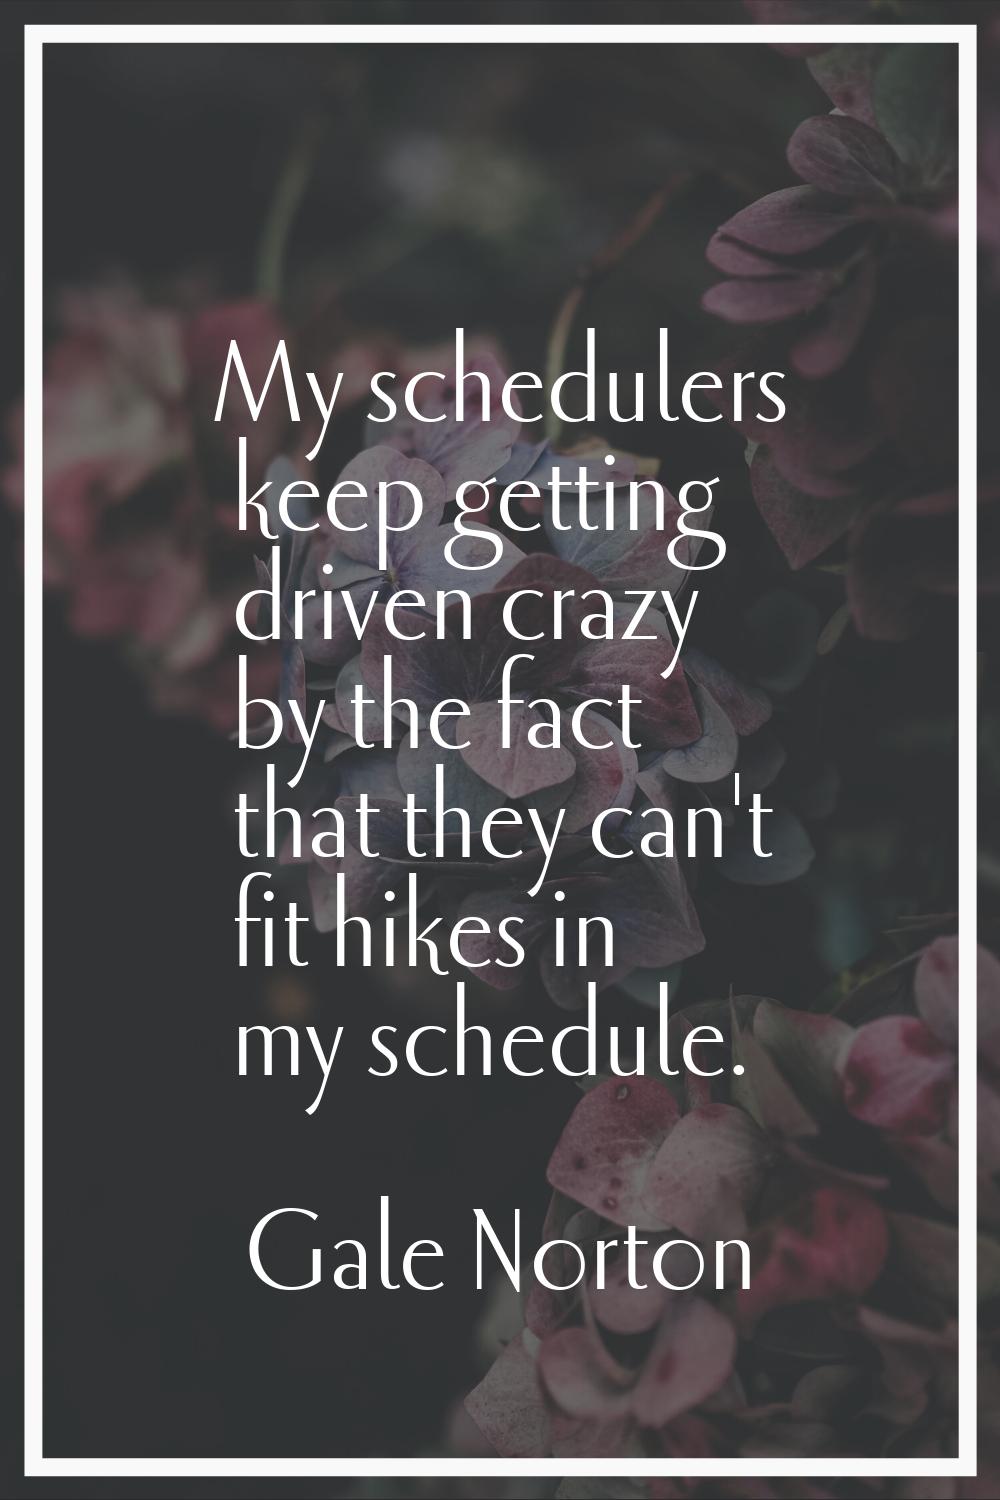 My schedulers keep getting driven crazy by the fact that they can't fit hikes in my schedule.